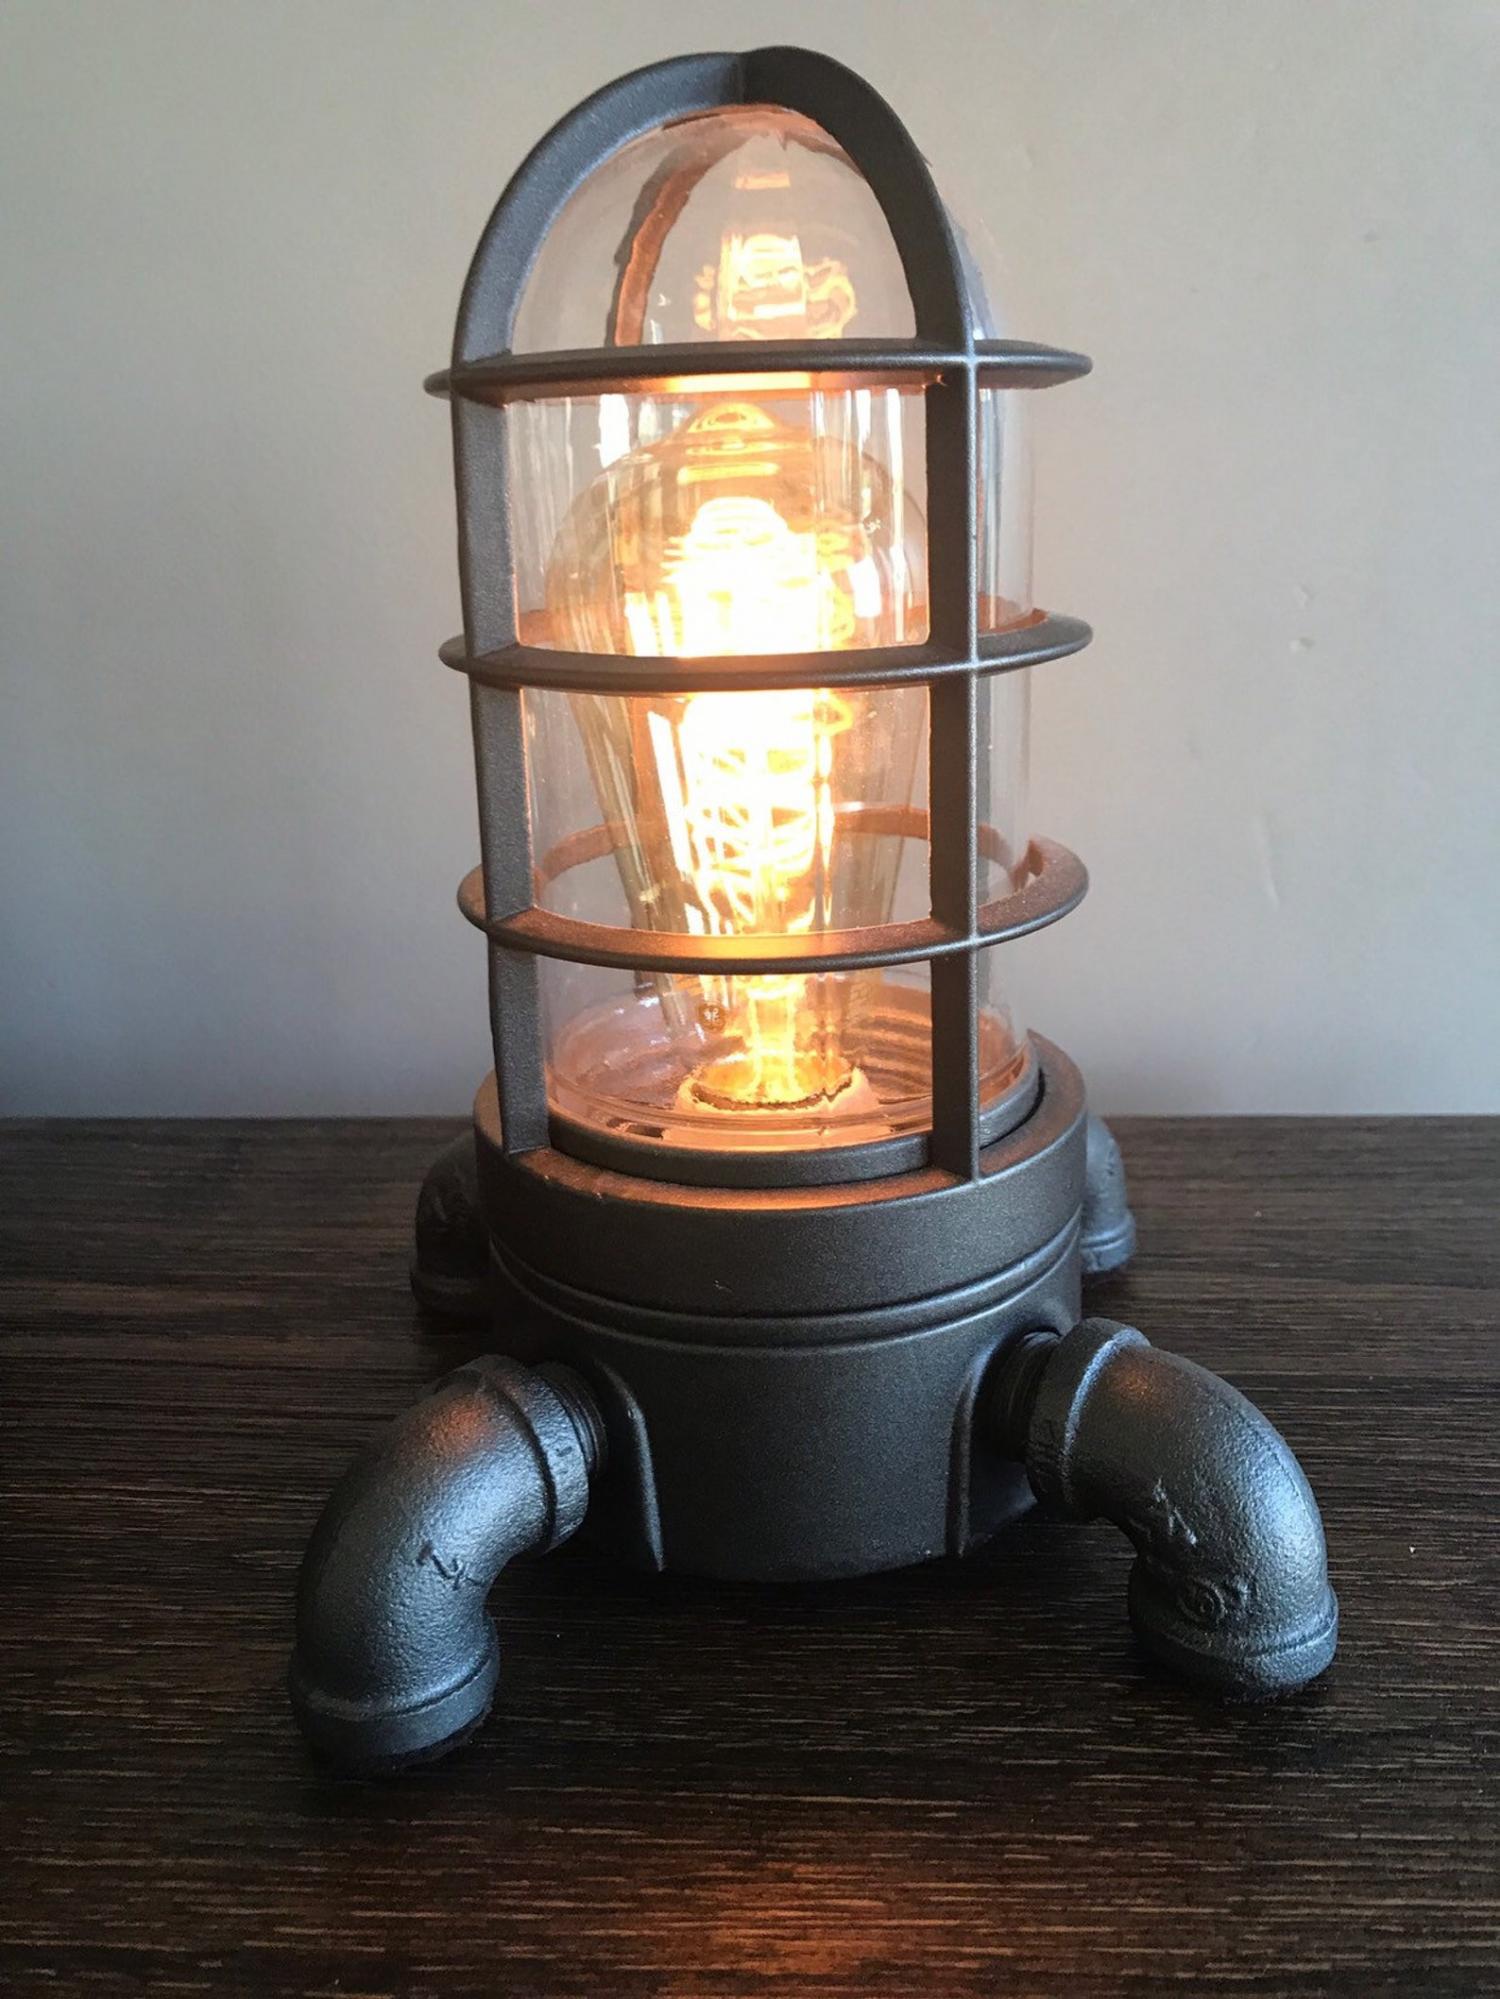 Retro Rocketship Desk Lamp Made From Pipes